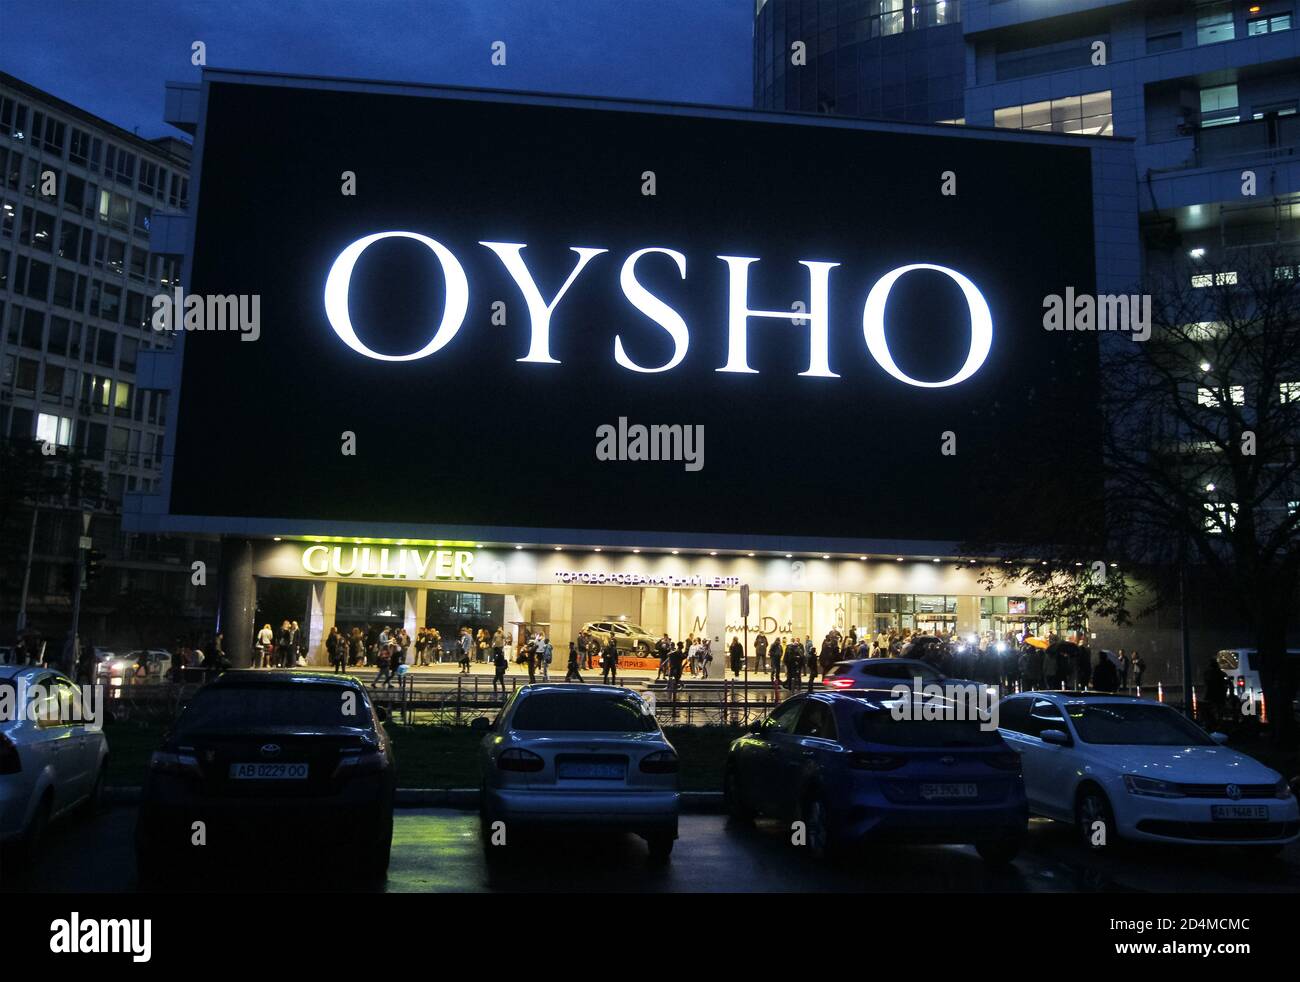 Spanish clothing retailer specialising in women's homewear and undergarments  owned by Inditex group, Oysho, store seen in Spain Stock Photo - Alamy